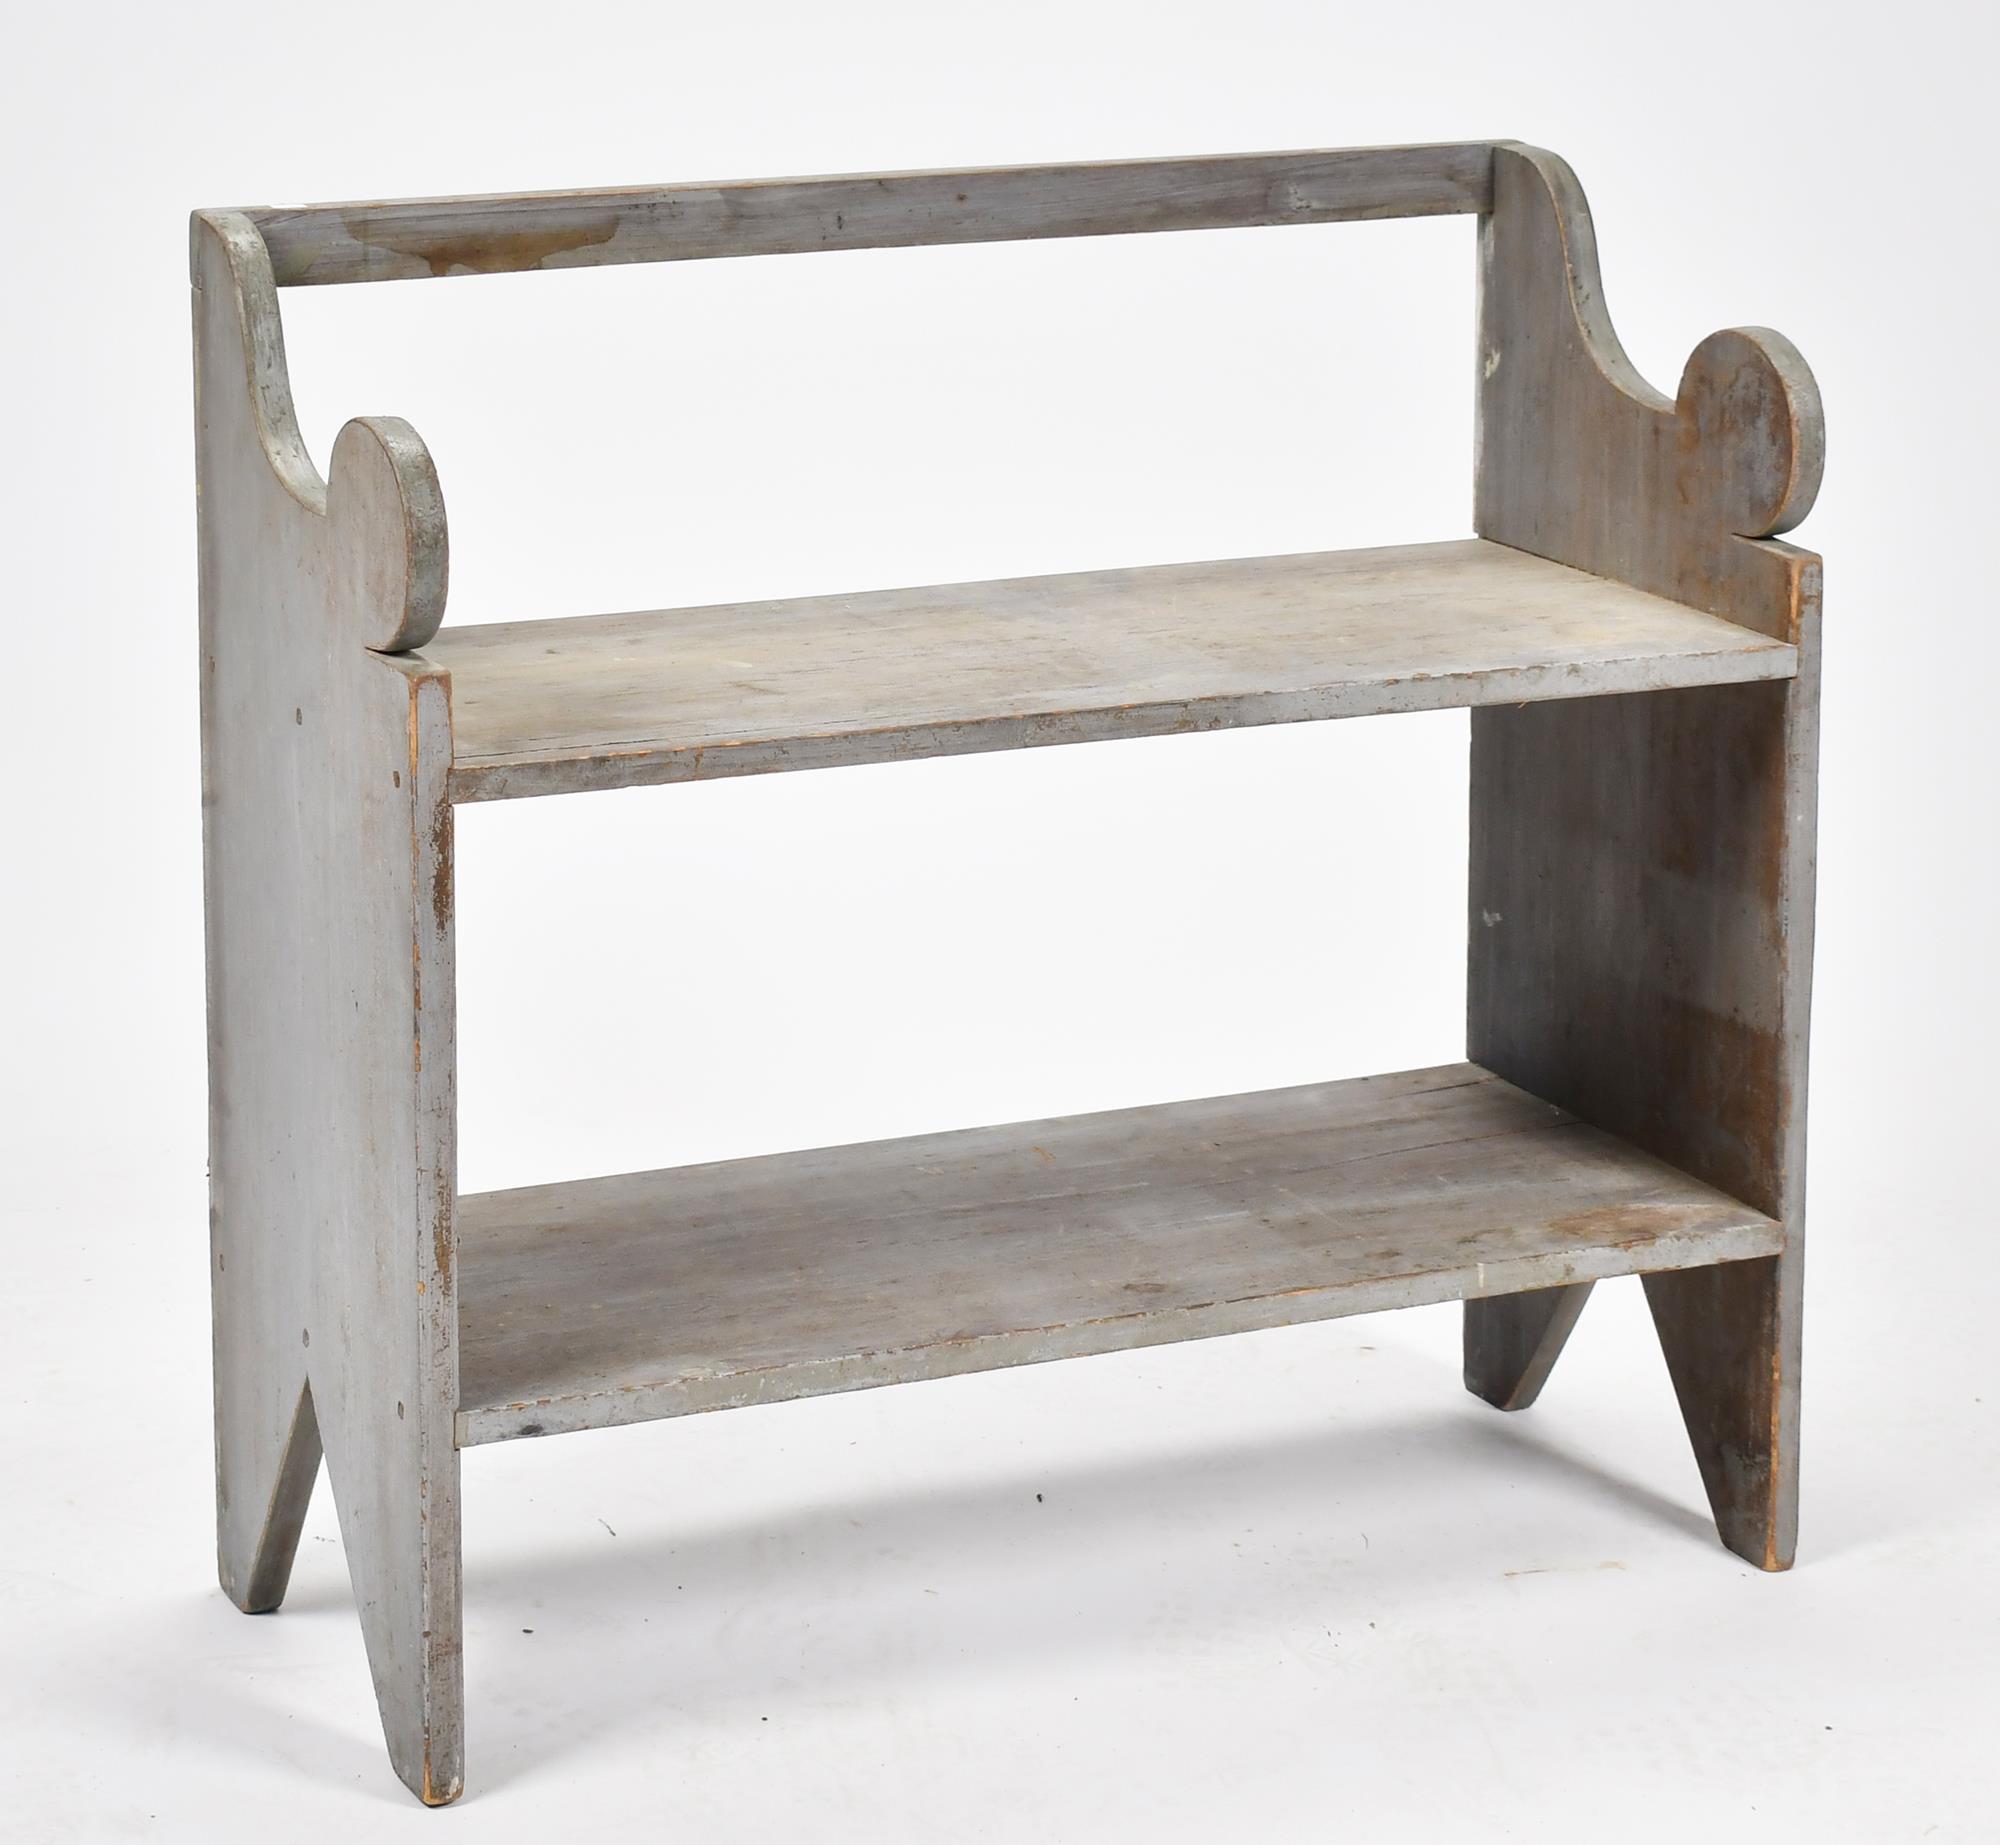 19TH C. GRAY PAINTED BUCKET BENCH.